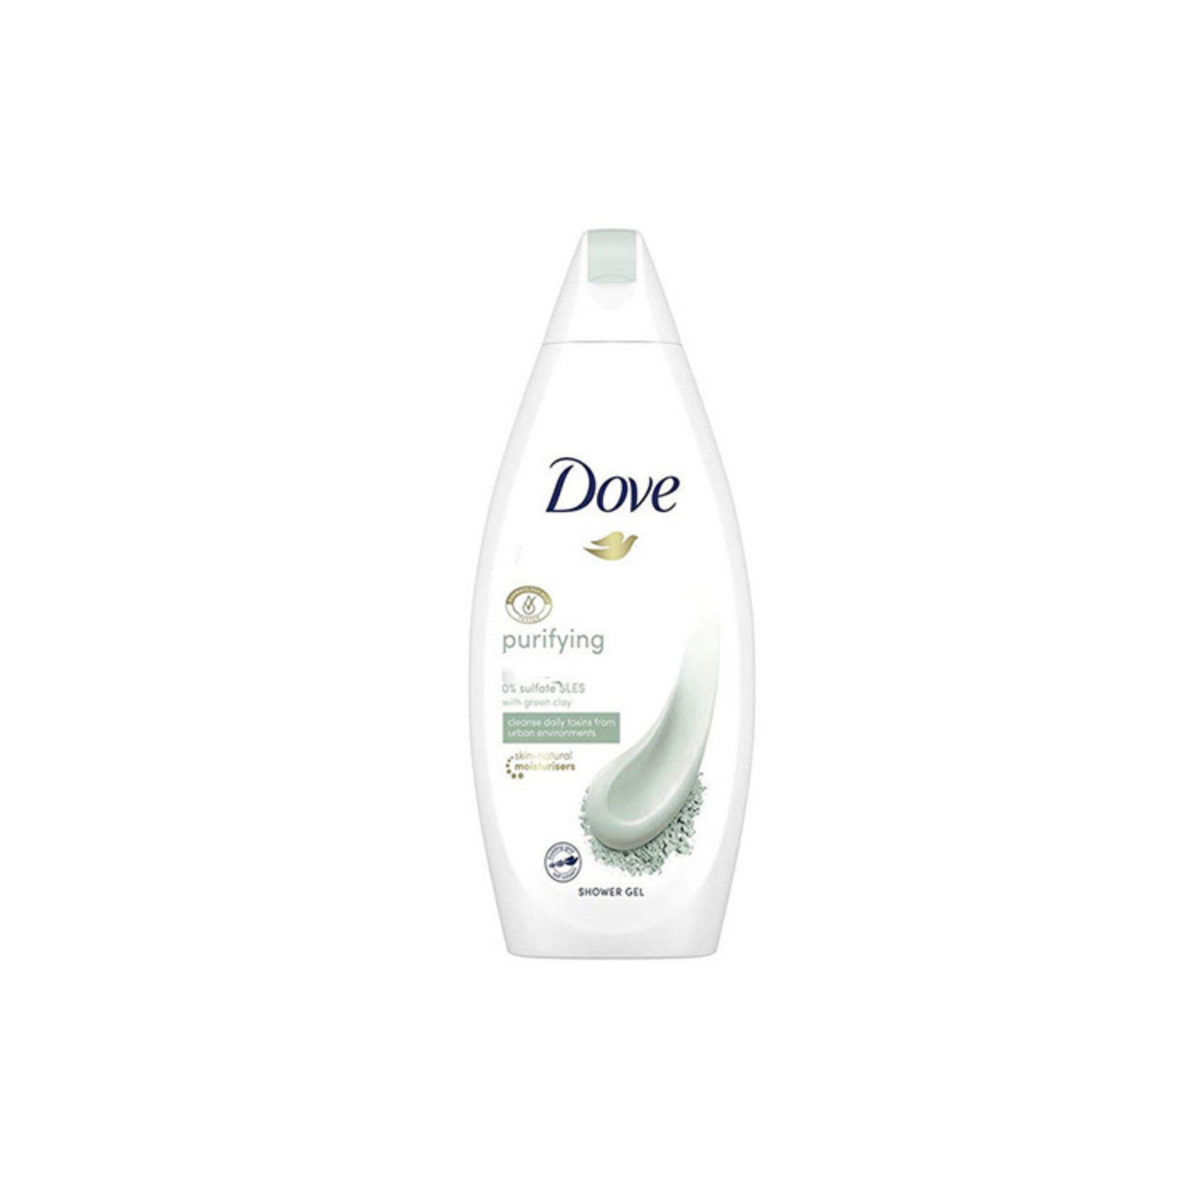 dove-purifying-cleanses-impurities-from-urban-environments-body-wash-uae-250ml